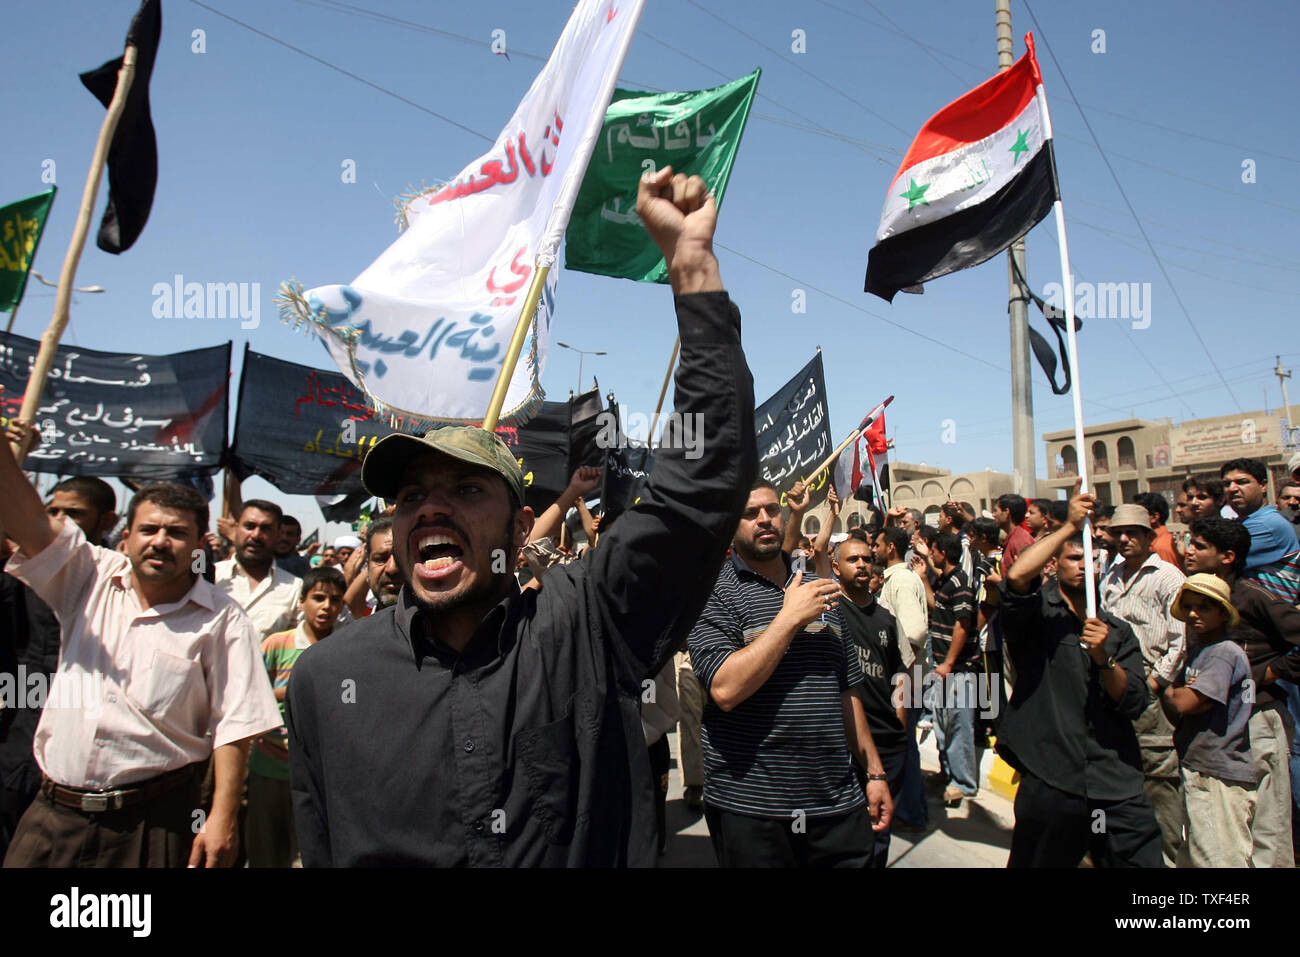 Iraqi Shiite Muslims take to the streets of Baghdad's Sadr City to protest yesterday's bombing of the Golden Mosque in Samarra on Thursday June 14, 2007. Sunni extremist linked to Al Qaida are blamed for the attack on one of Shiite's holiest shrines. (UPI Photo/Adel Abd Al-Hassan) Stock Photo